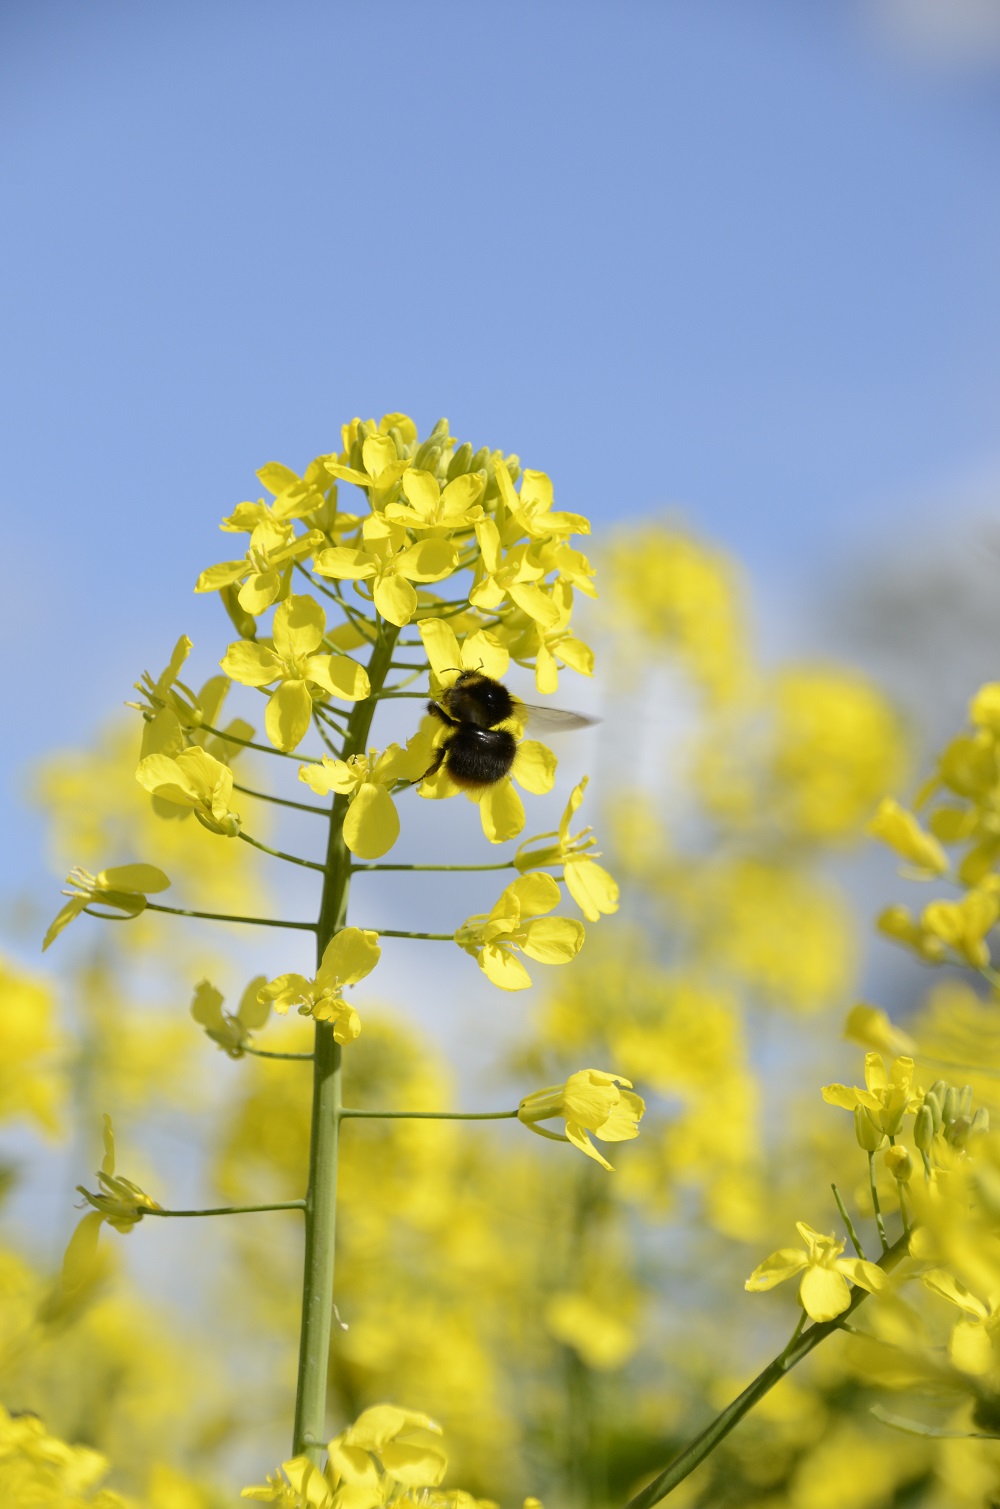 OSR flower with bumble bee